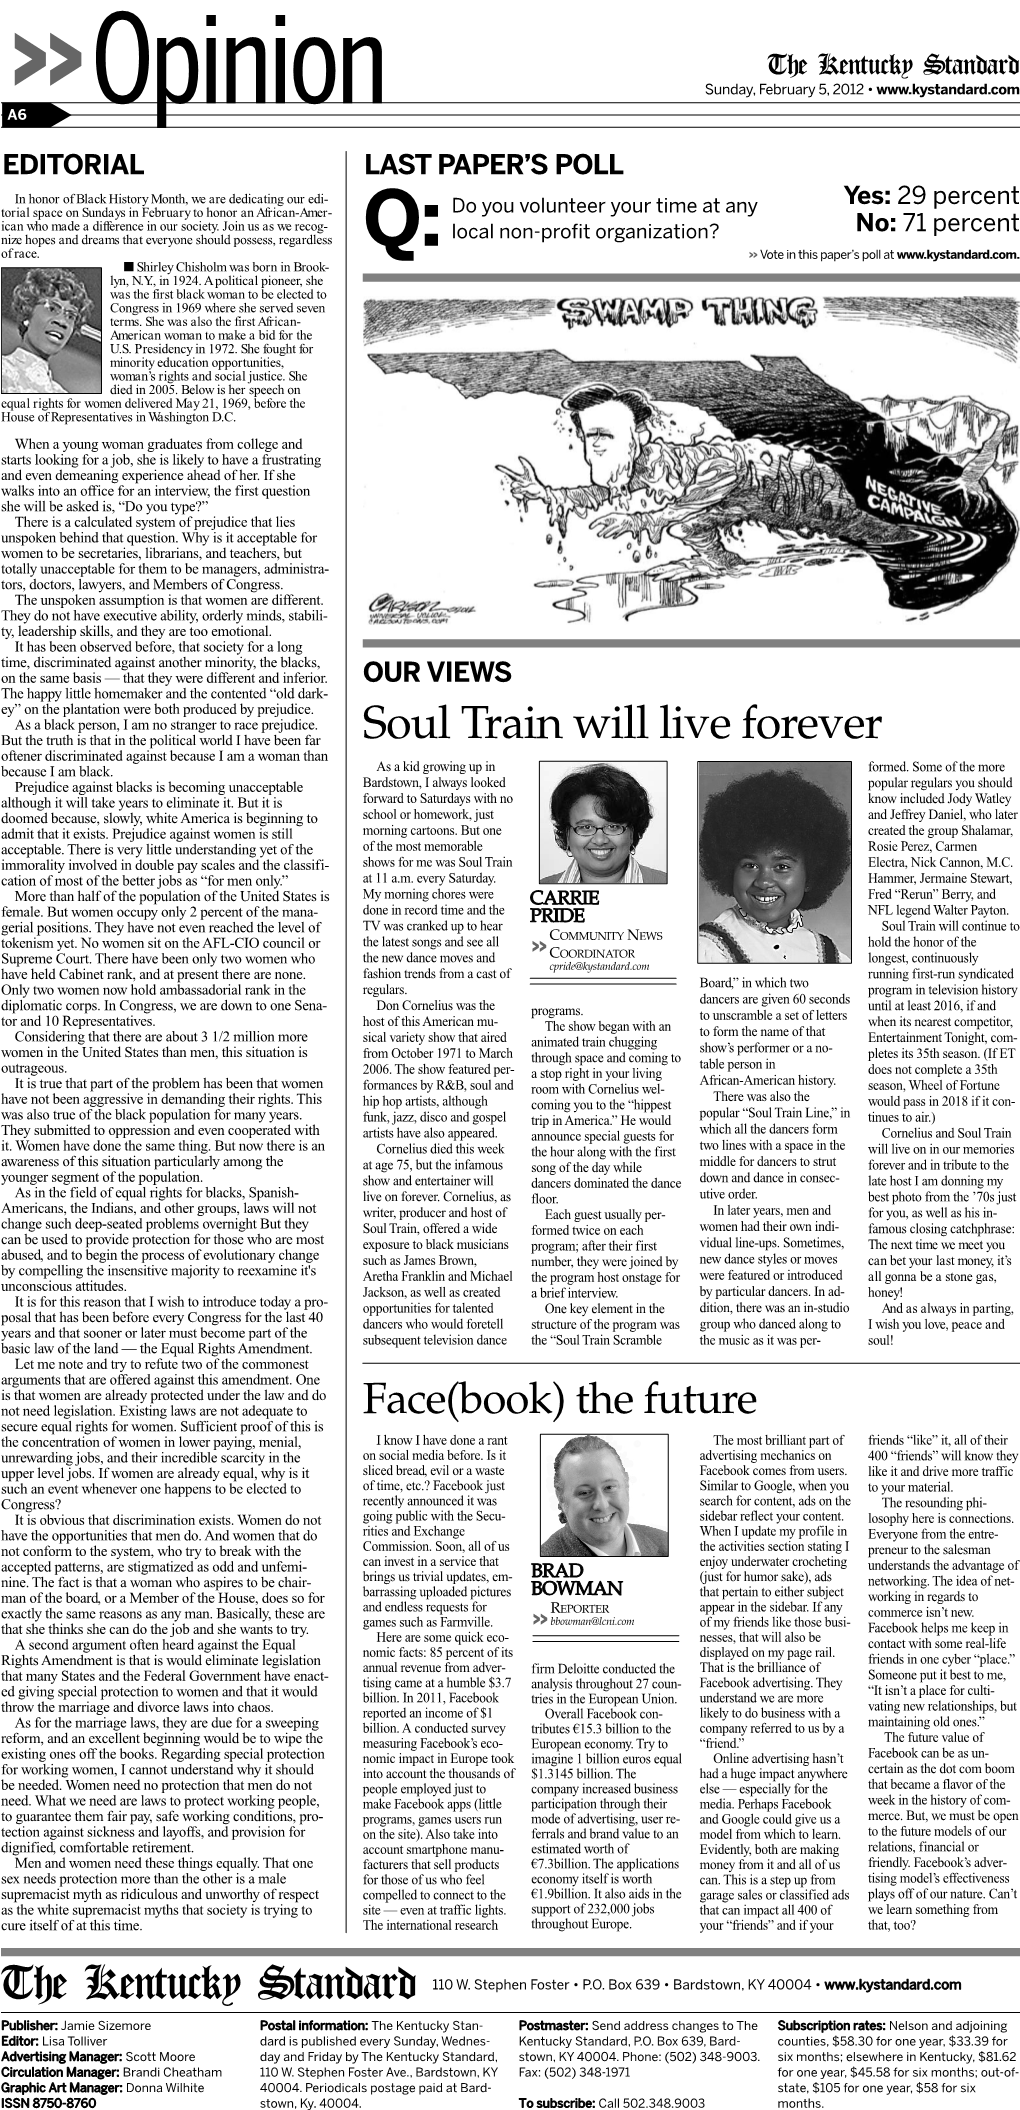 Soul Train Will Live Forever Oftener Discriminated Against Because I Am a Woman Than Because I Am Black